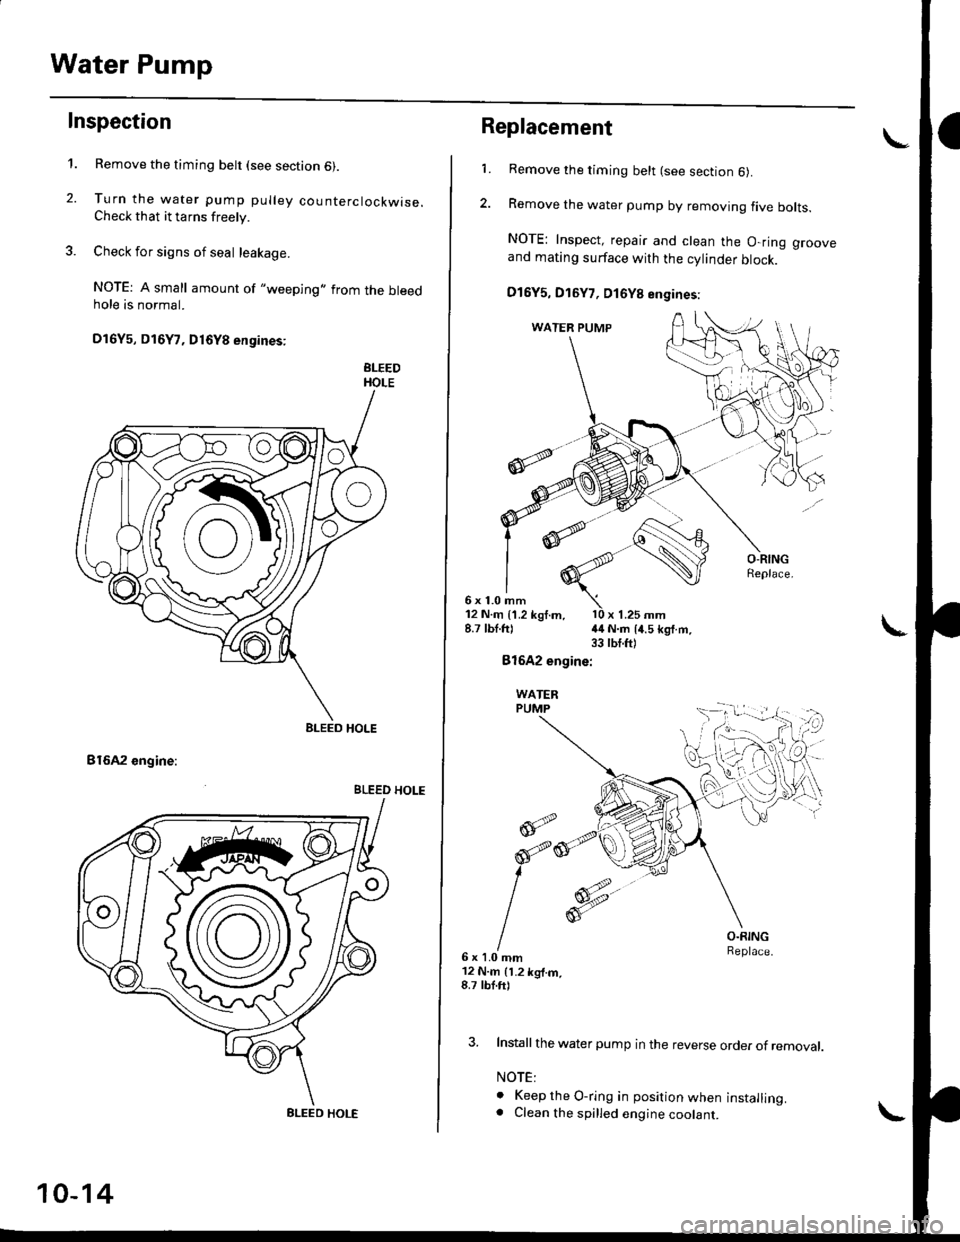 HONDA CIVIC 1997 6.G Workshop Manual Water Pump
Inspection
t.
2.
Remove the timing belt (see section 6).
Turn the water pump pulley counterclockwise.Check that it tarns freely.
Check for signs of seal leakage.
NOTE: A small amount of "w